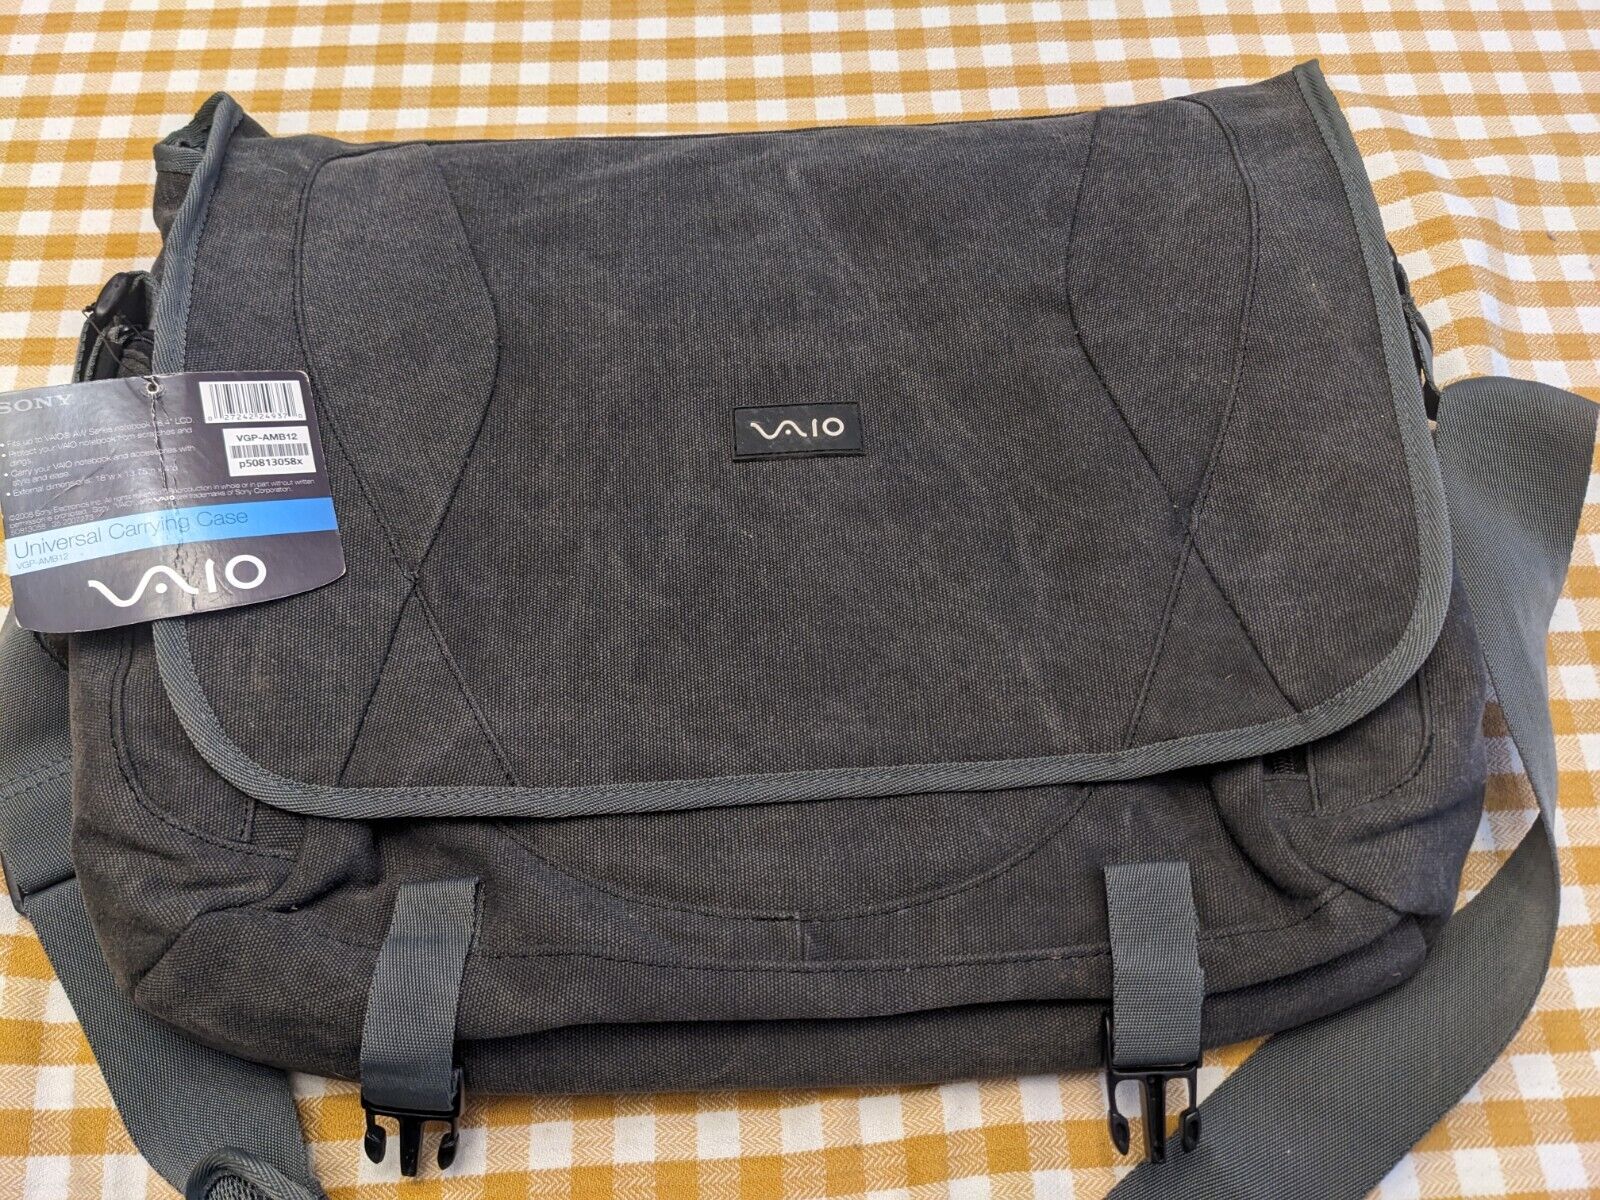 Sony Vaio Universal Carrying Case